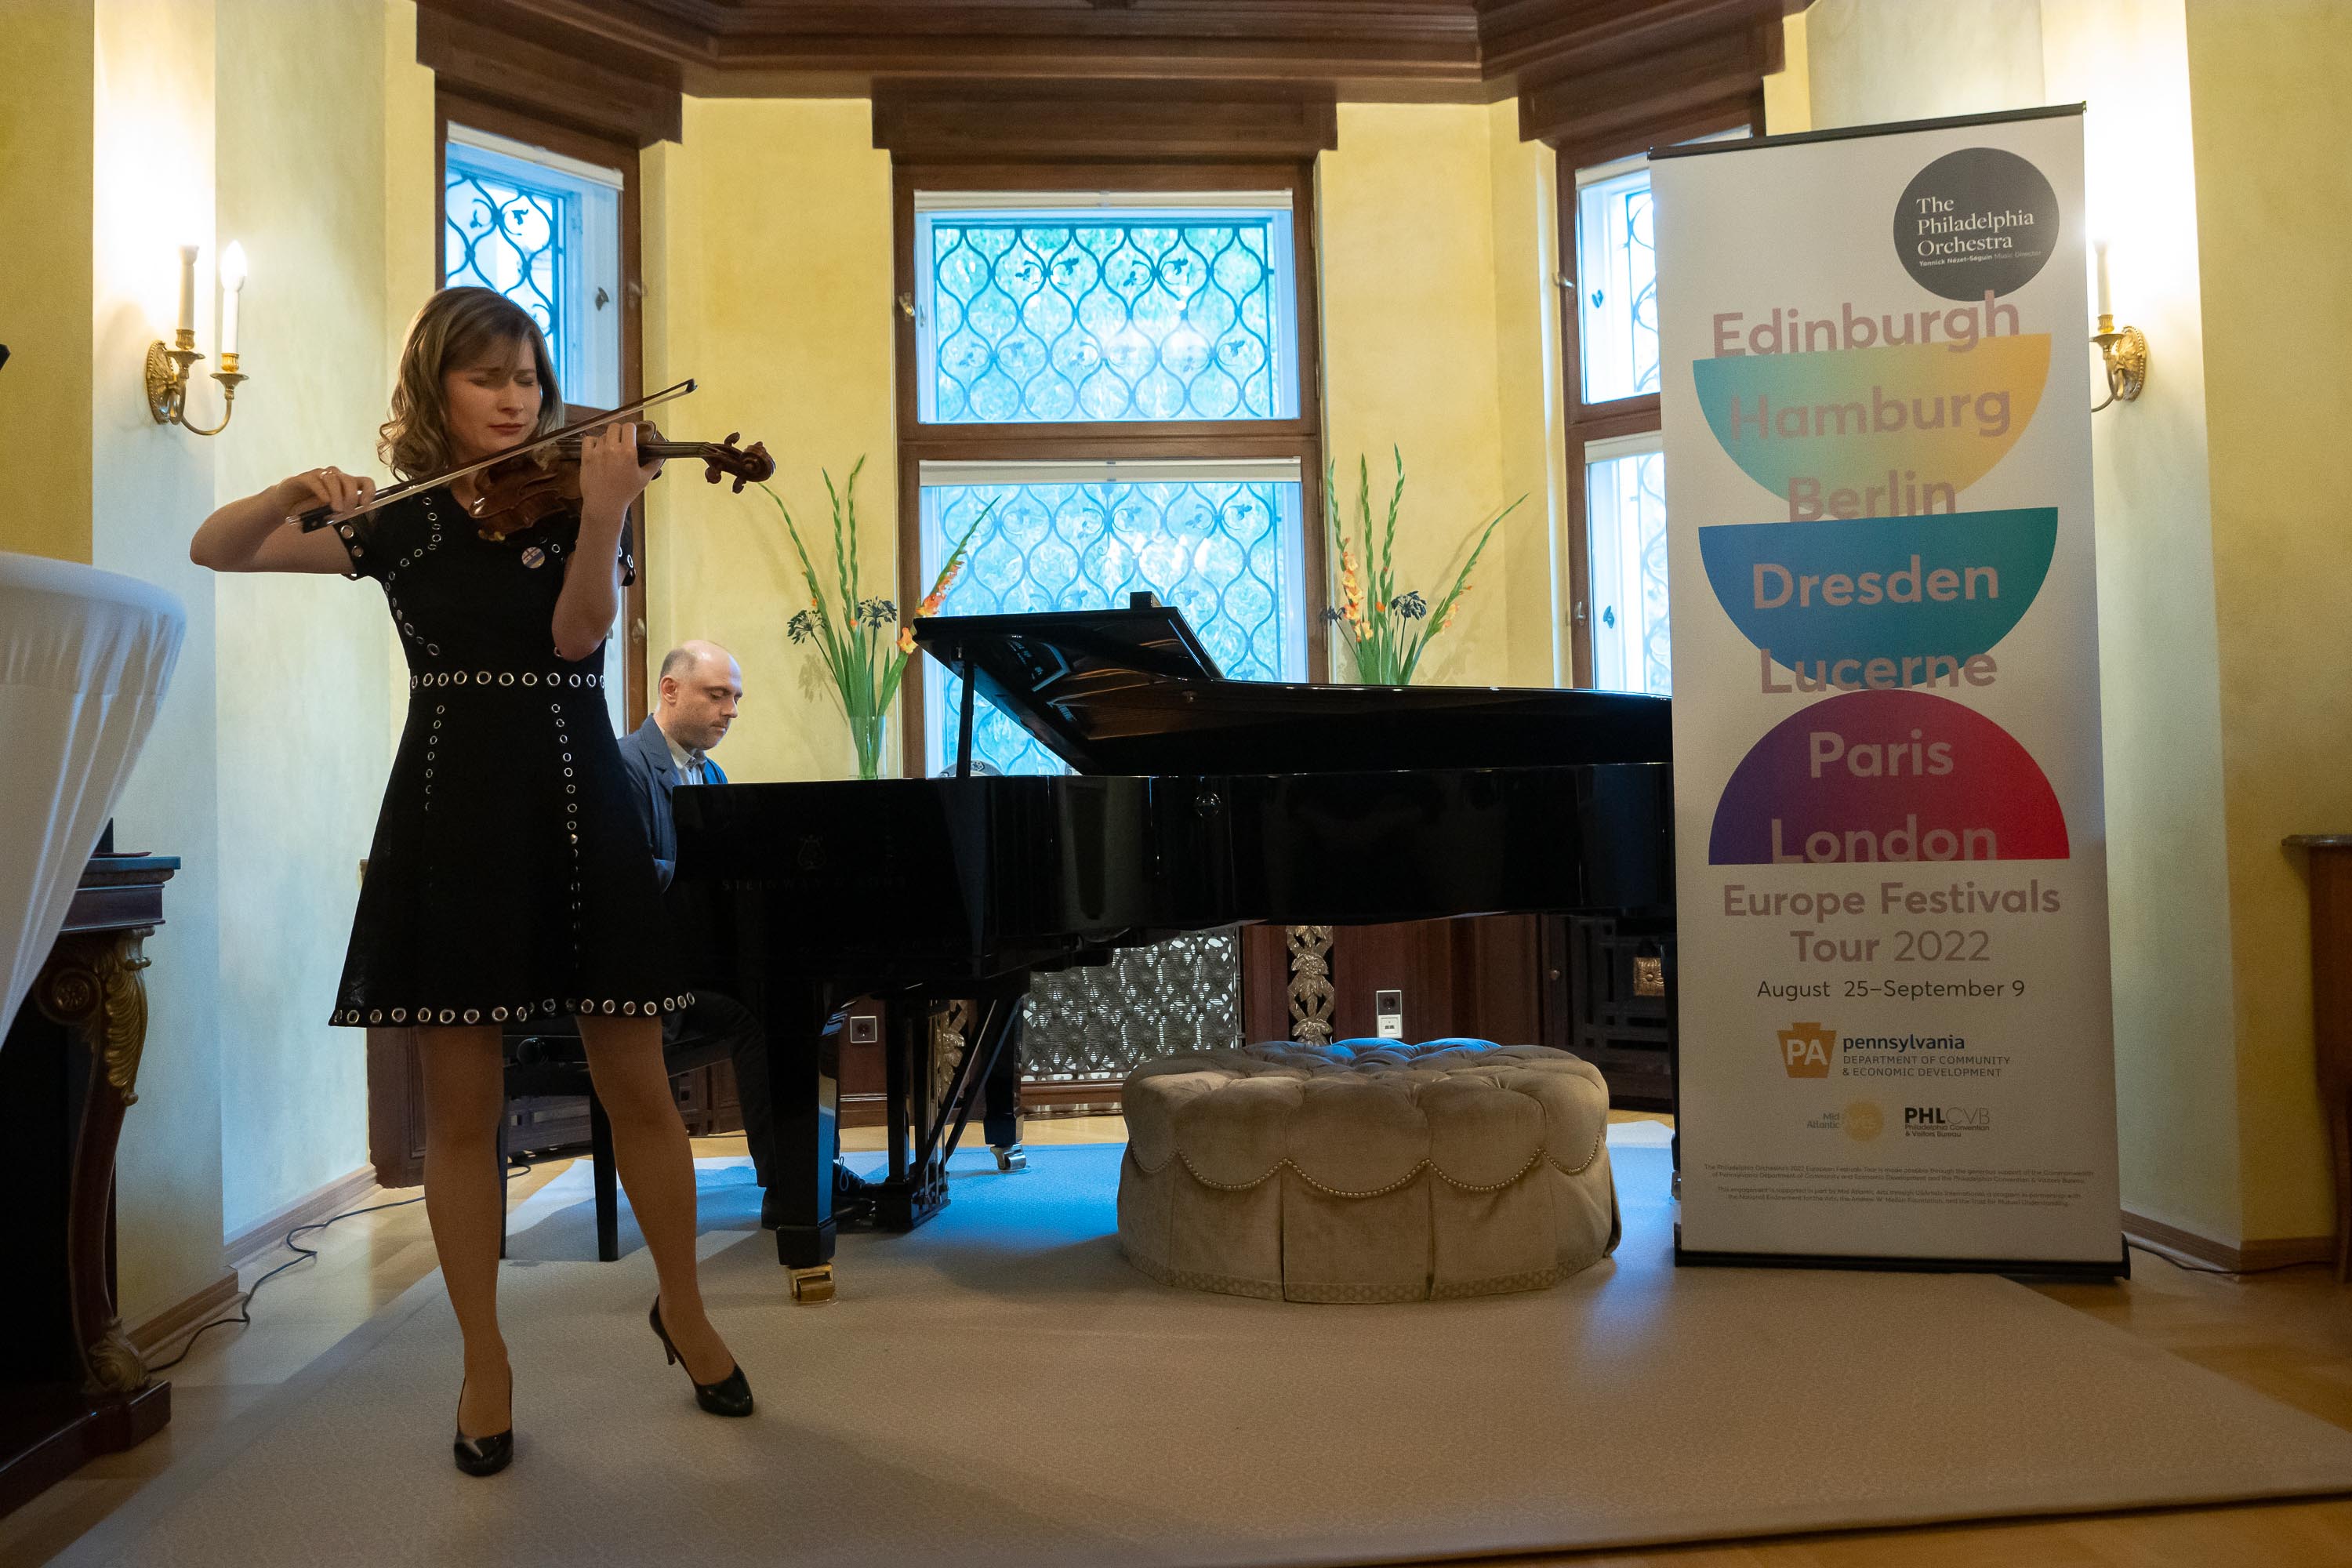 Violinist Lisa Batiashvili, one of the soloists on the tour, performs for the guests with her accompanist